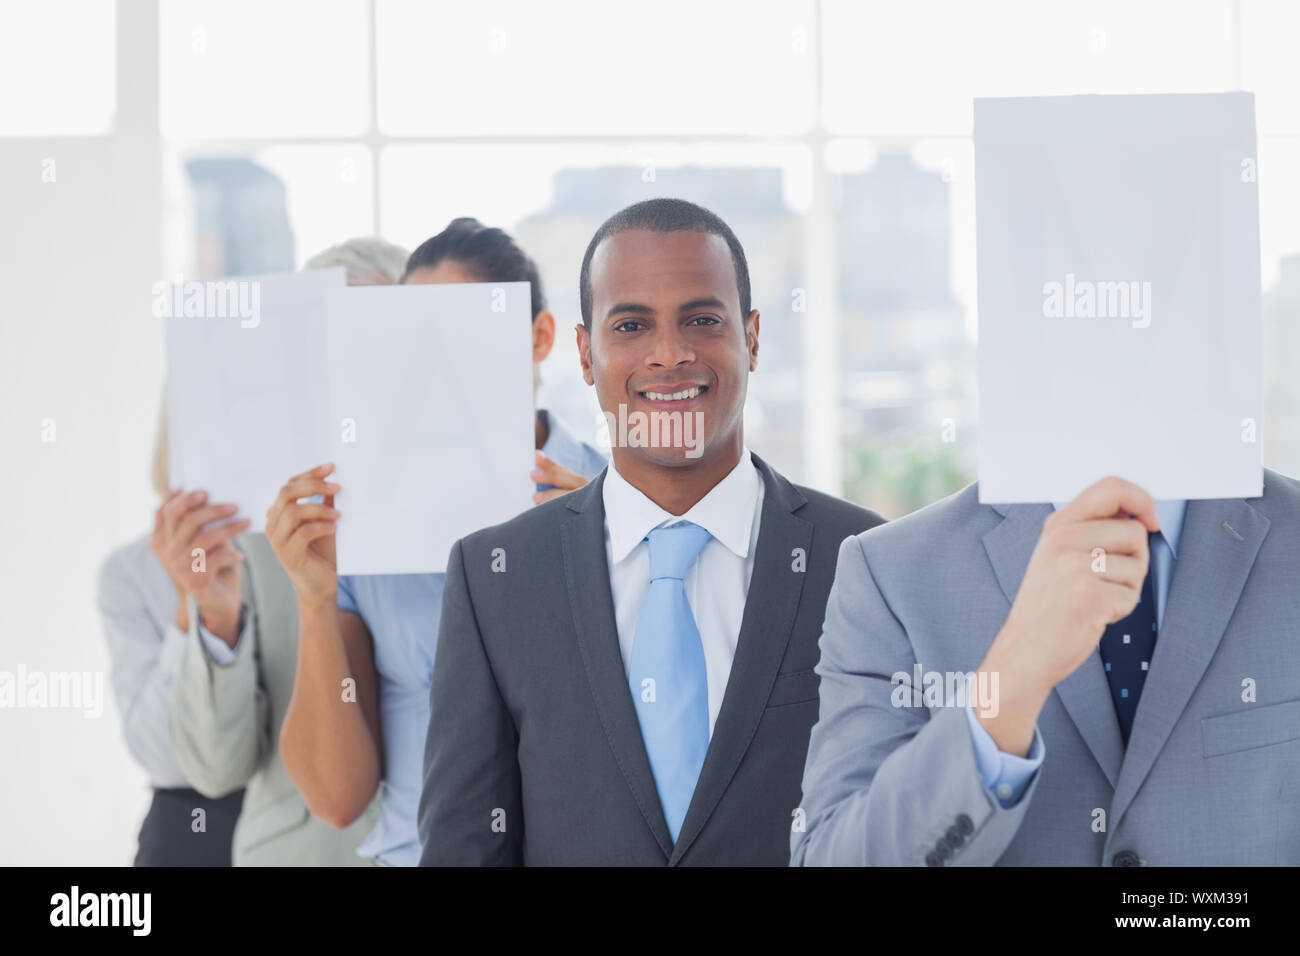 Businessman smiling at camera with colleagues covering faces with white pages Stock Photo